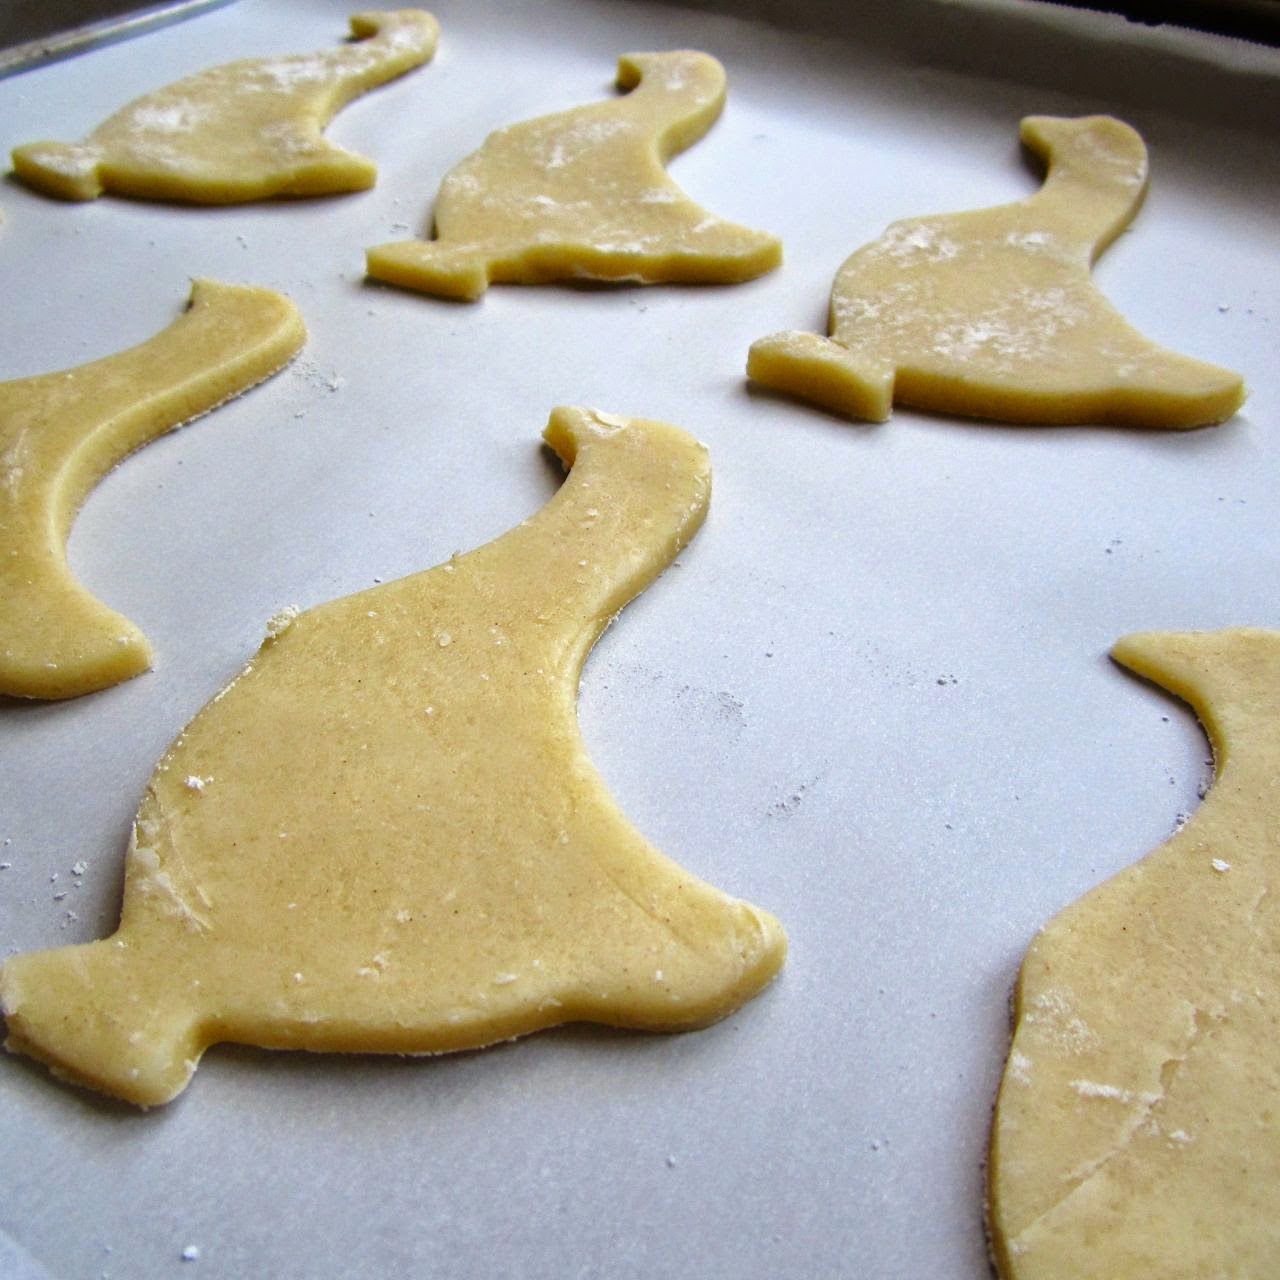 cut out cookies